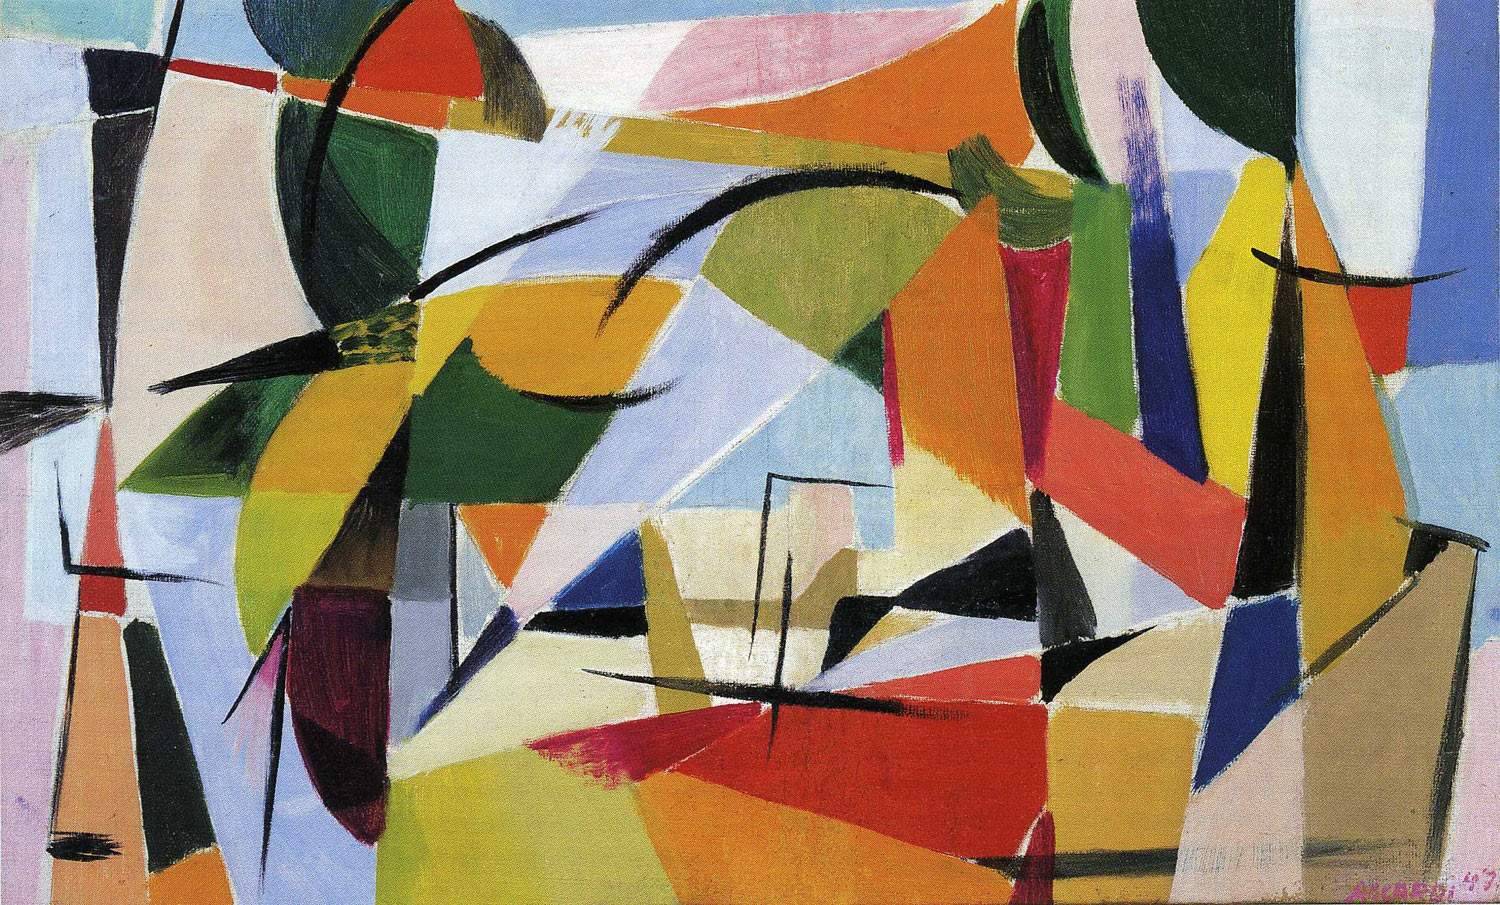 Carla Accardi, life and works of the great abstract artist 